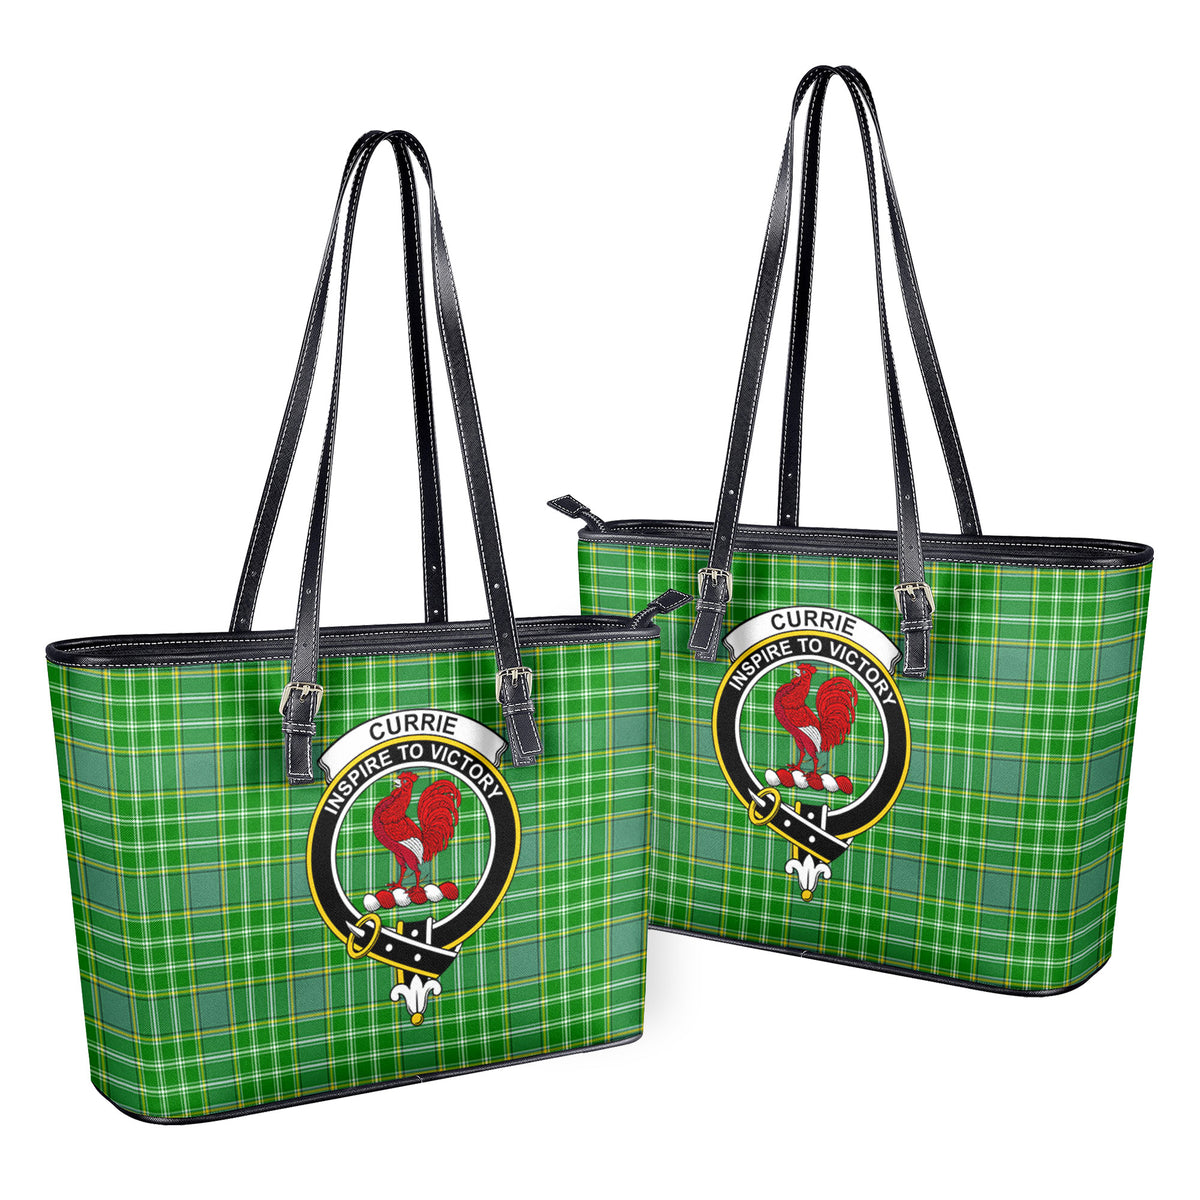 Currie Tartan Crest Leather Tote Bag